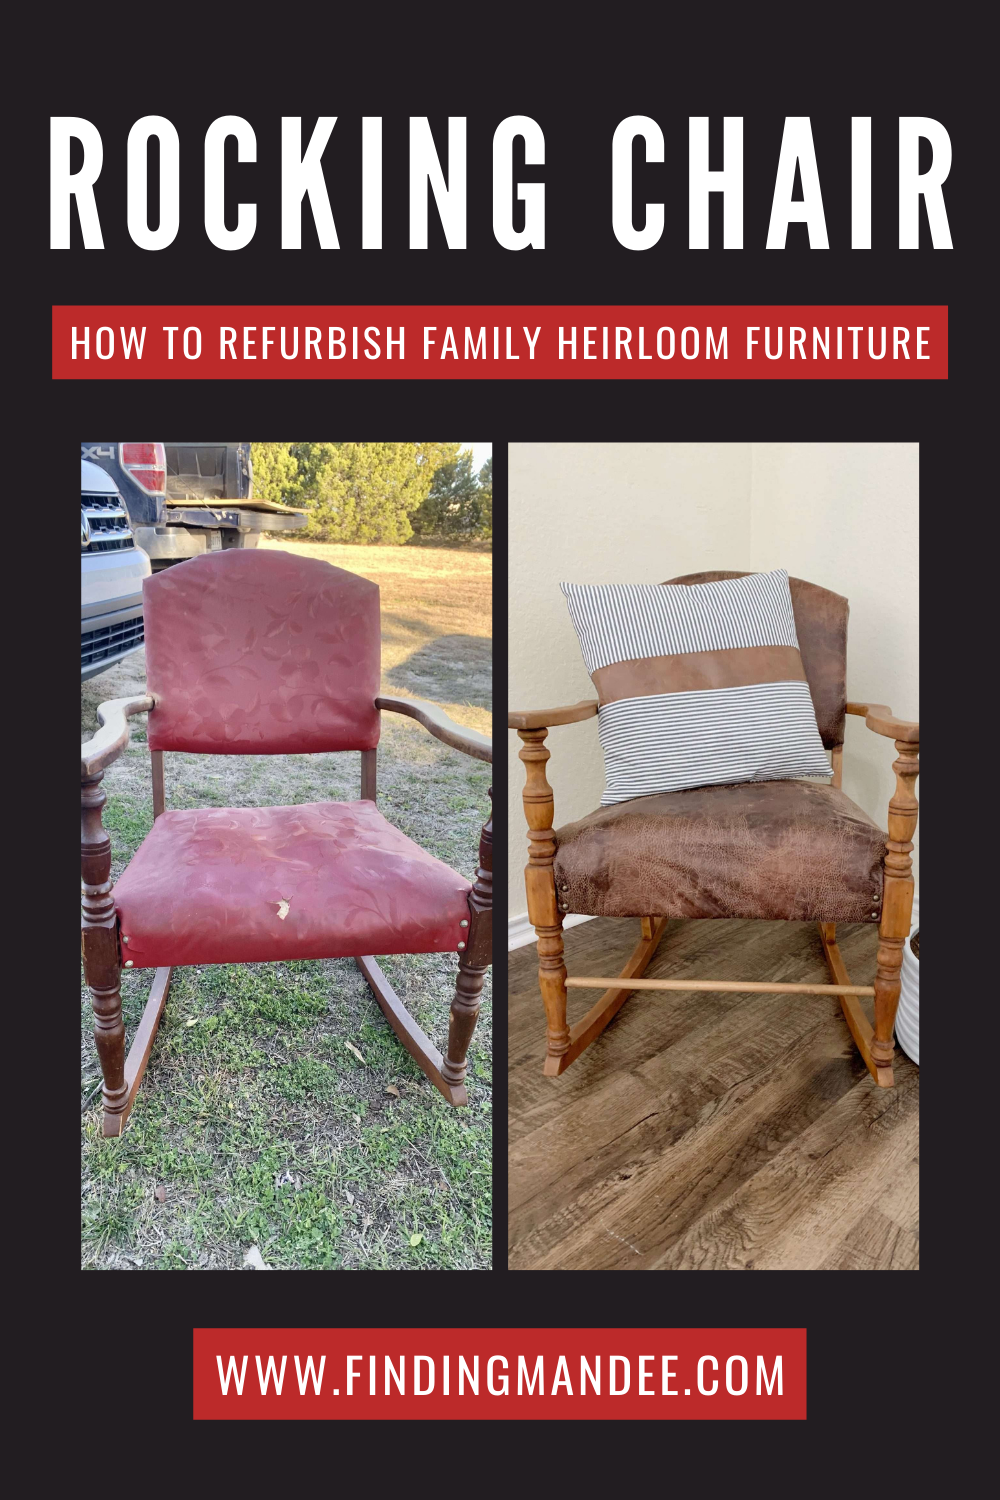 Rocking Chair: How to Refurbish Family Heirloom Furniture | Finding Mandee